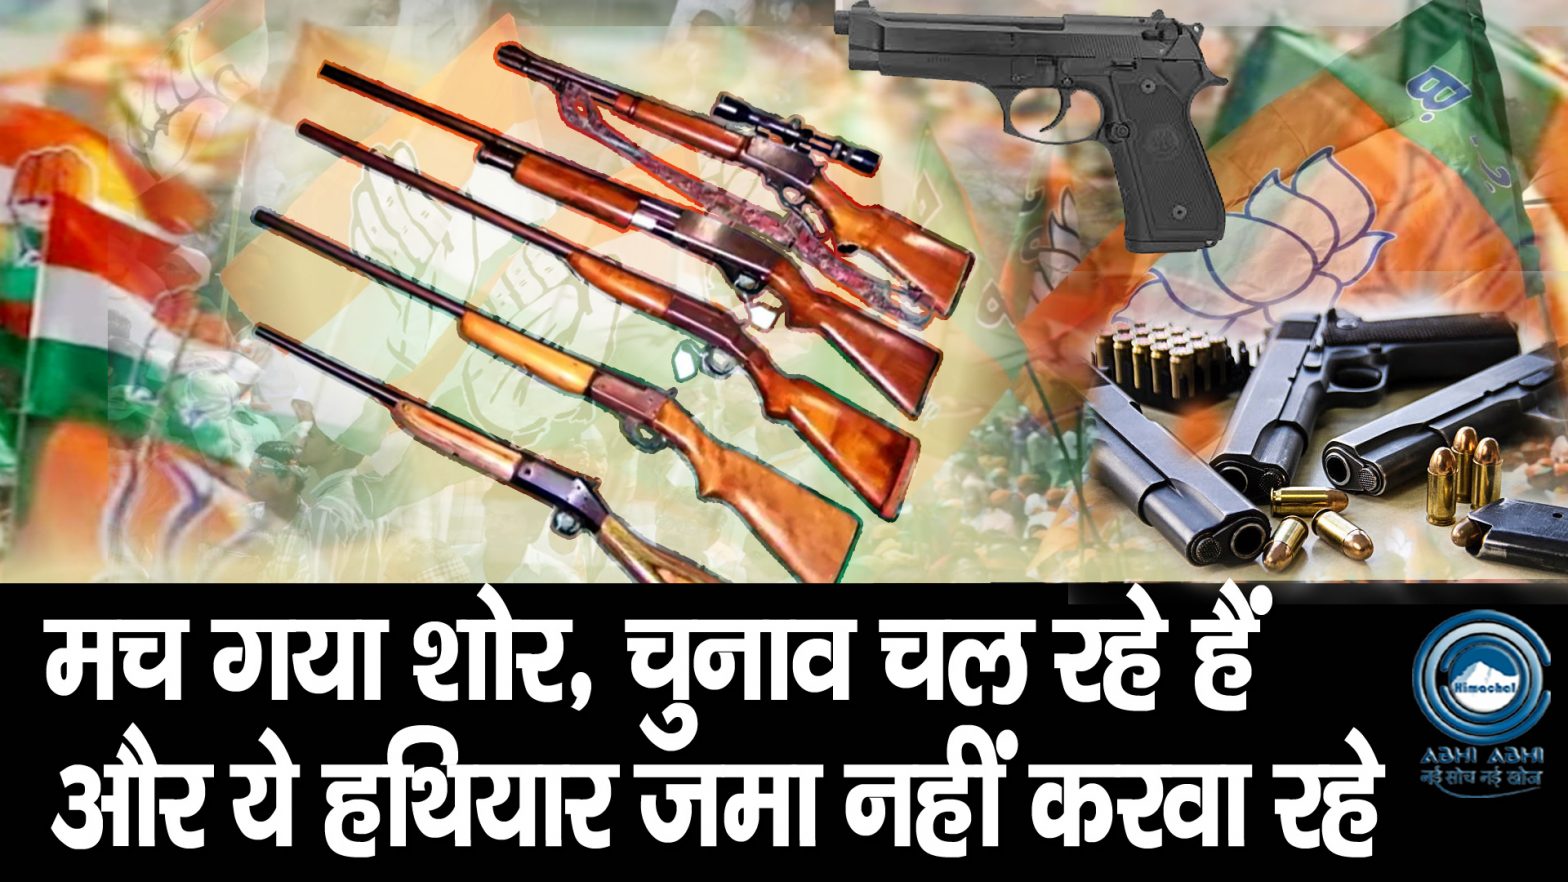 Weapons | Election | Himachal |